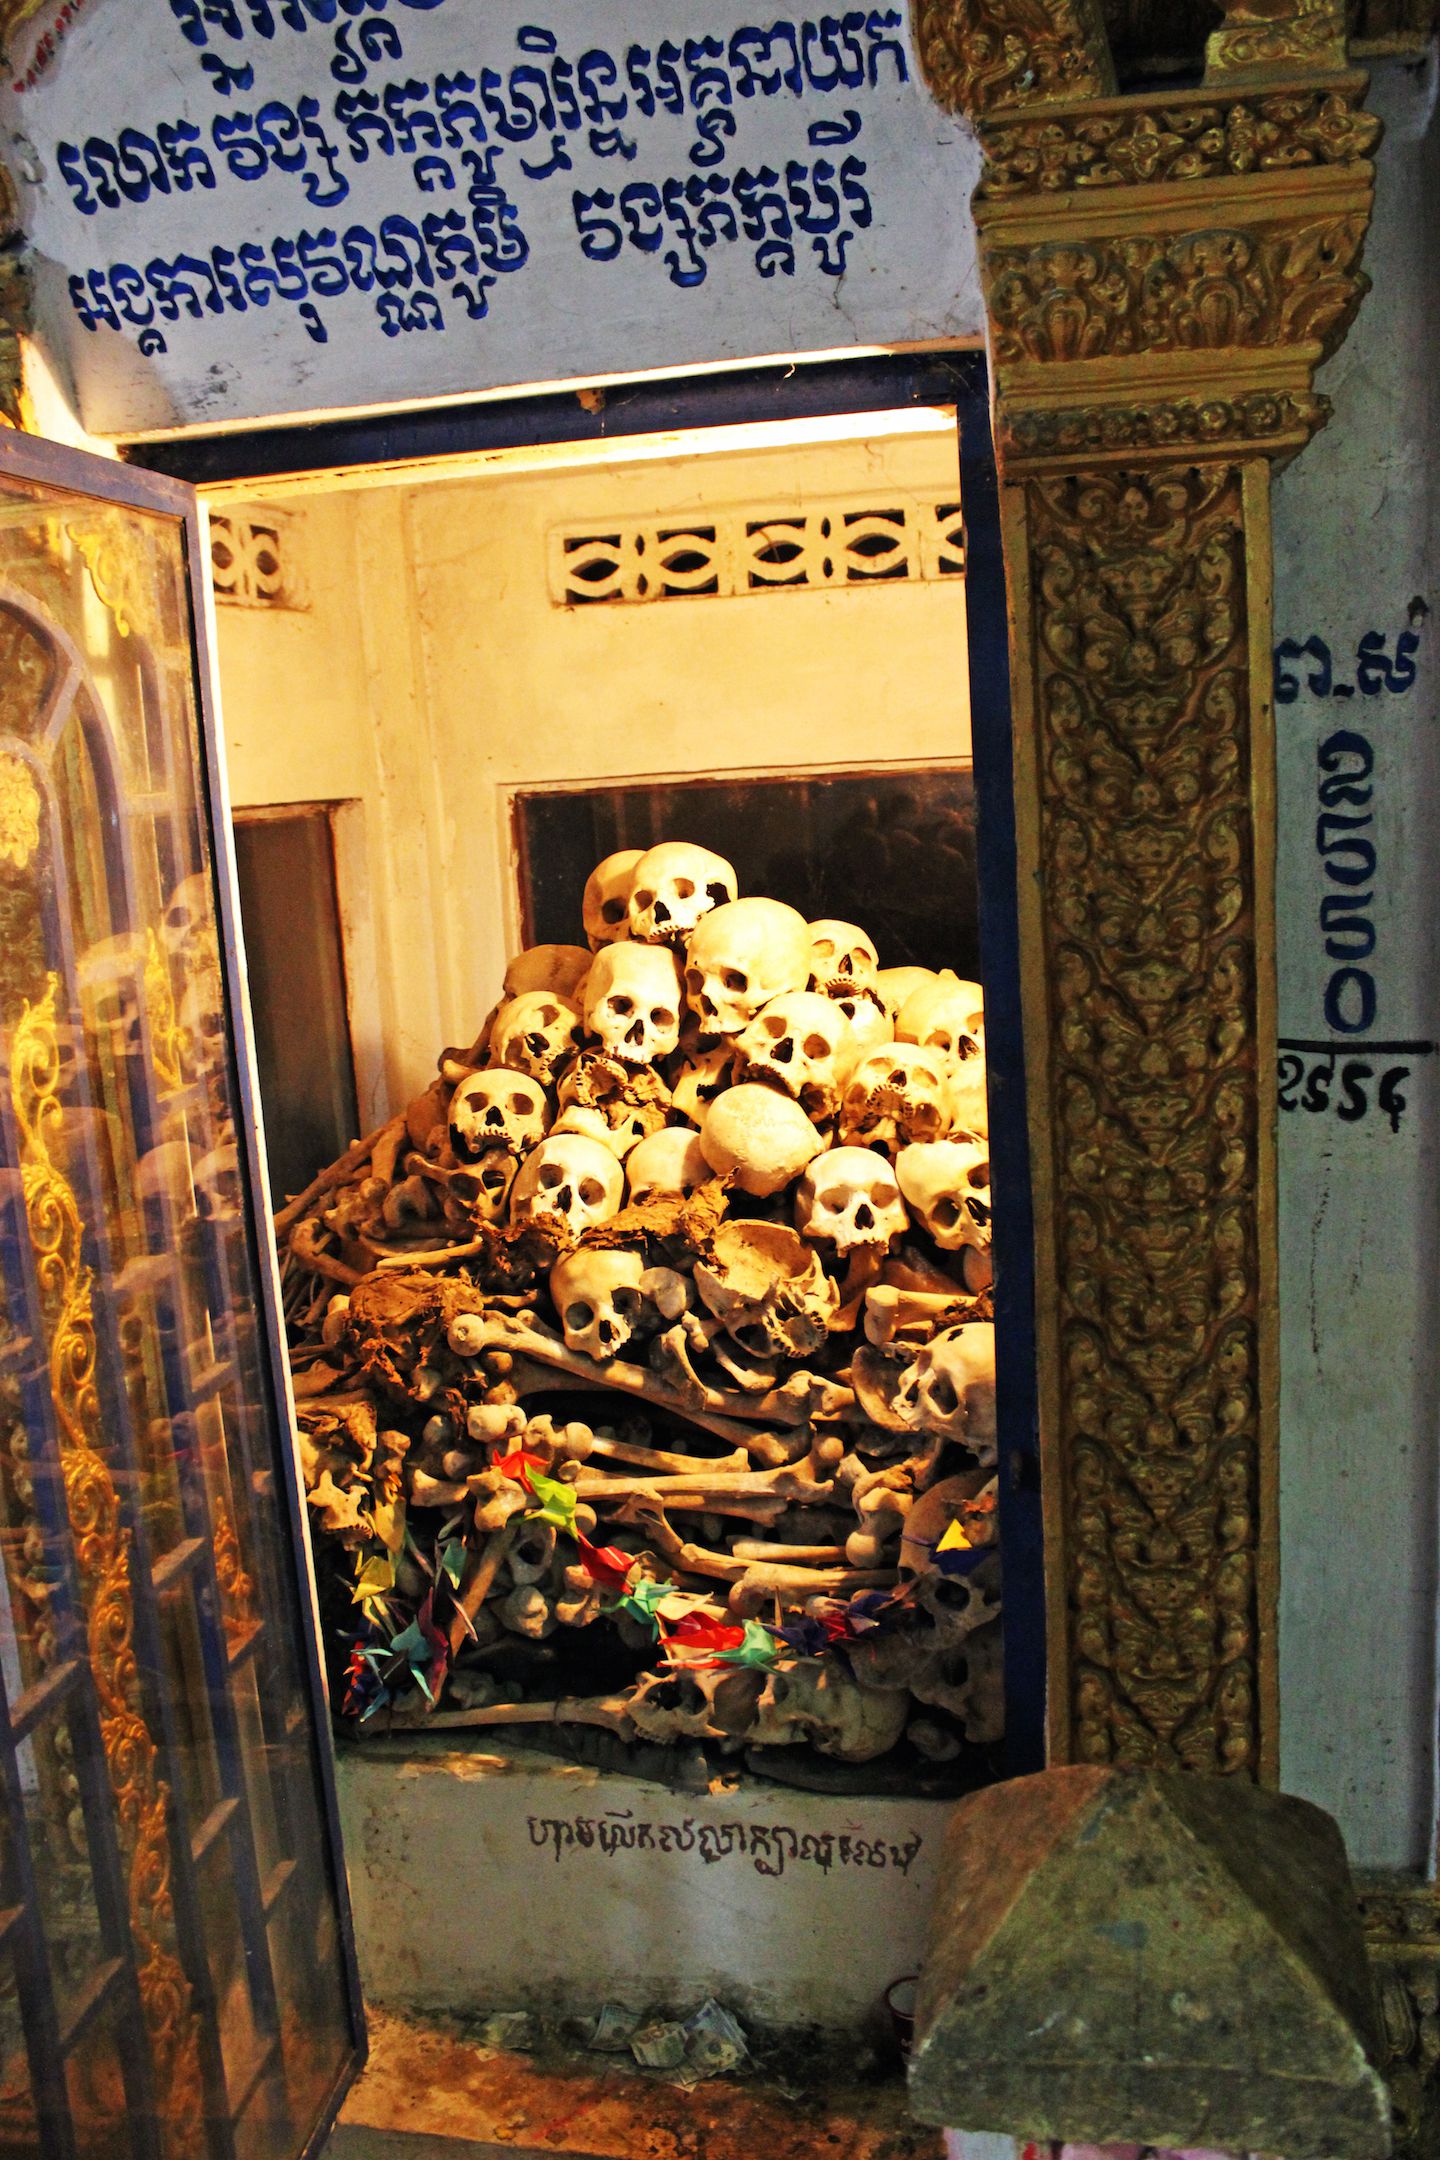 The memorial was filled with skulls of the victims